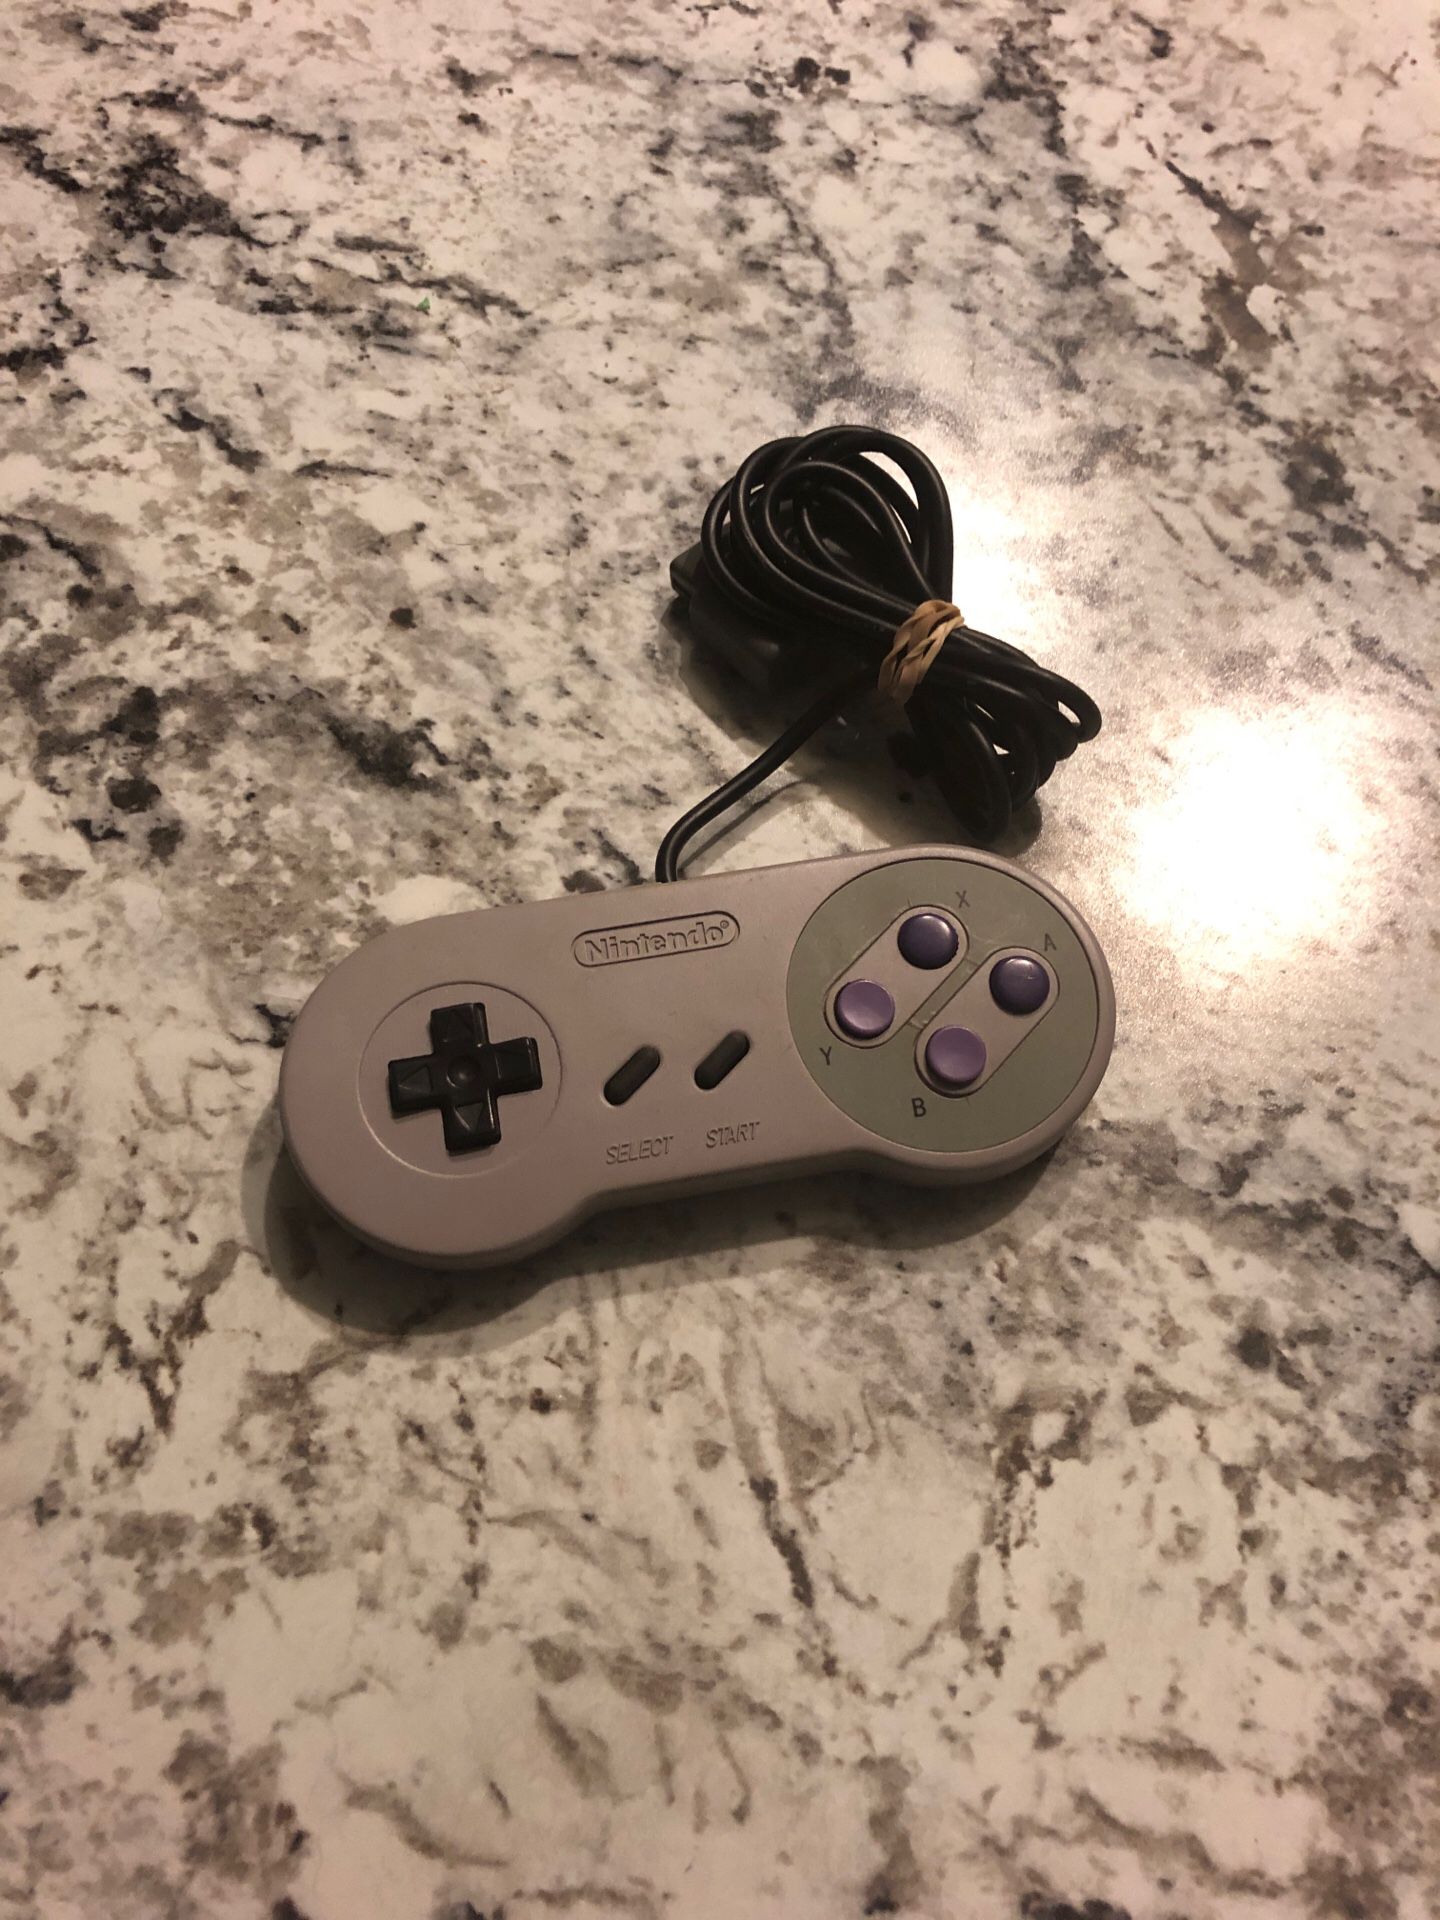 Fully functional NES controller